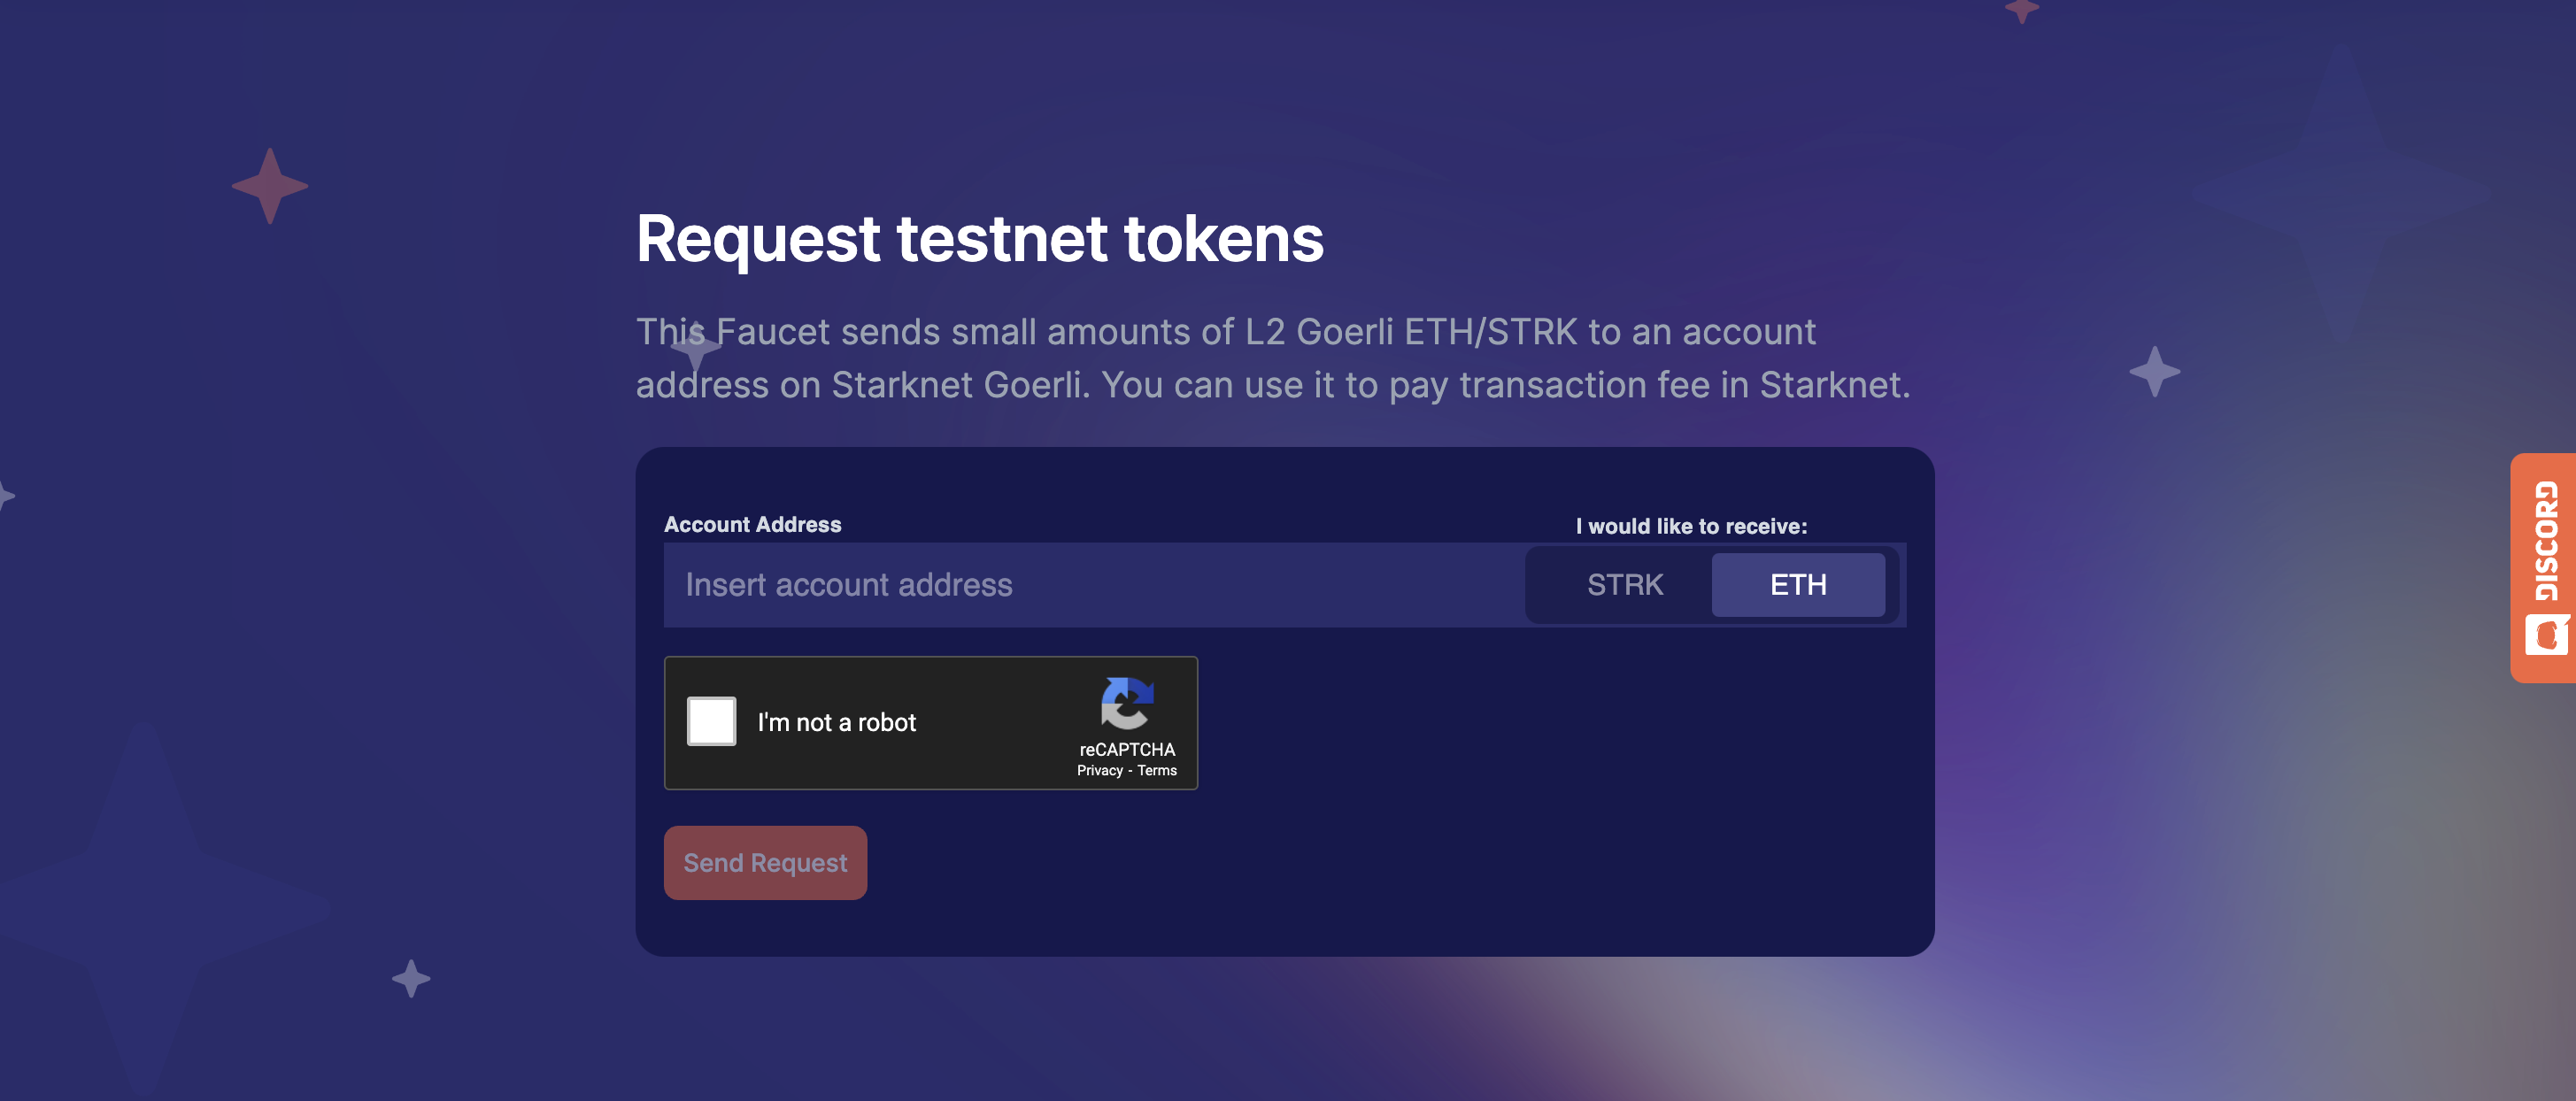 Starknet faucet landing page with address field and get Starknet funds button